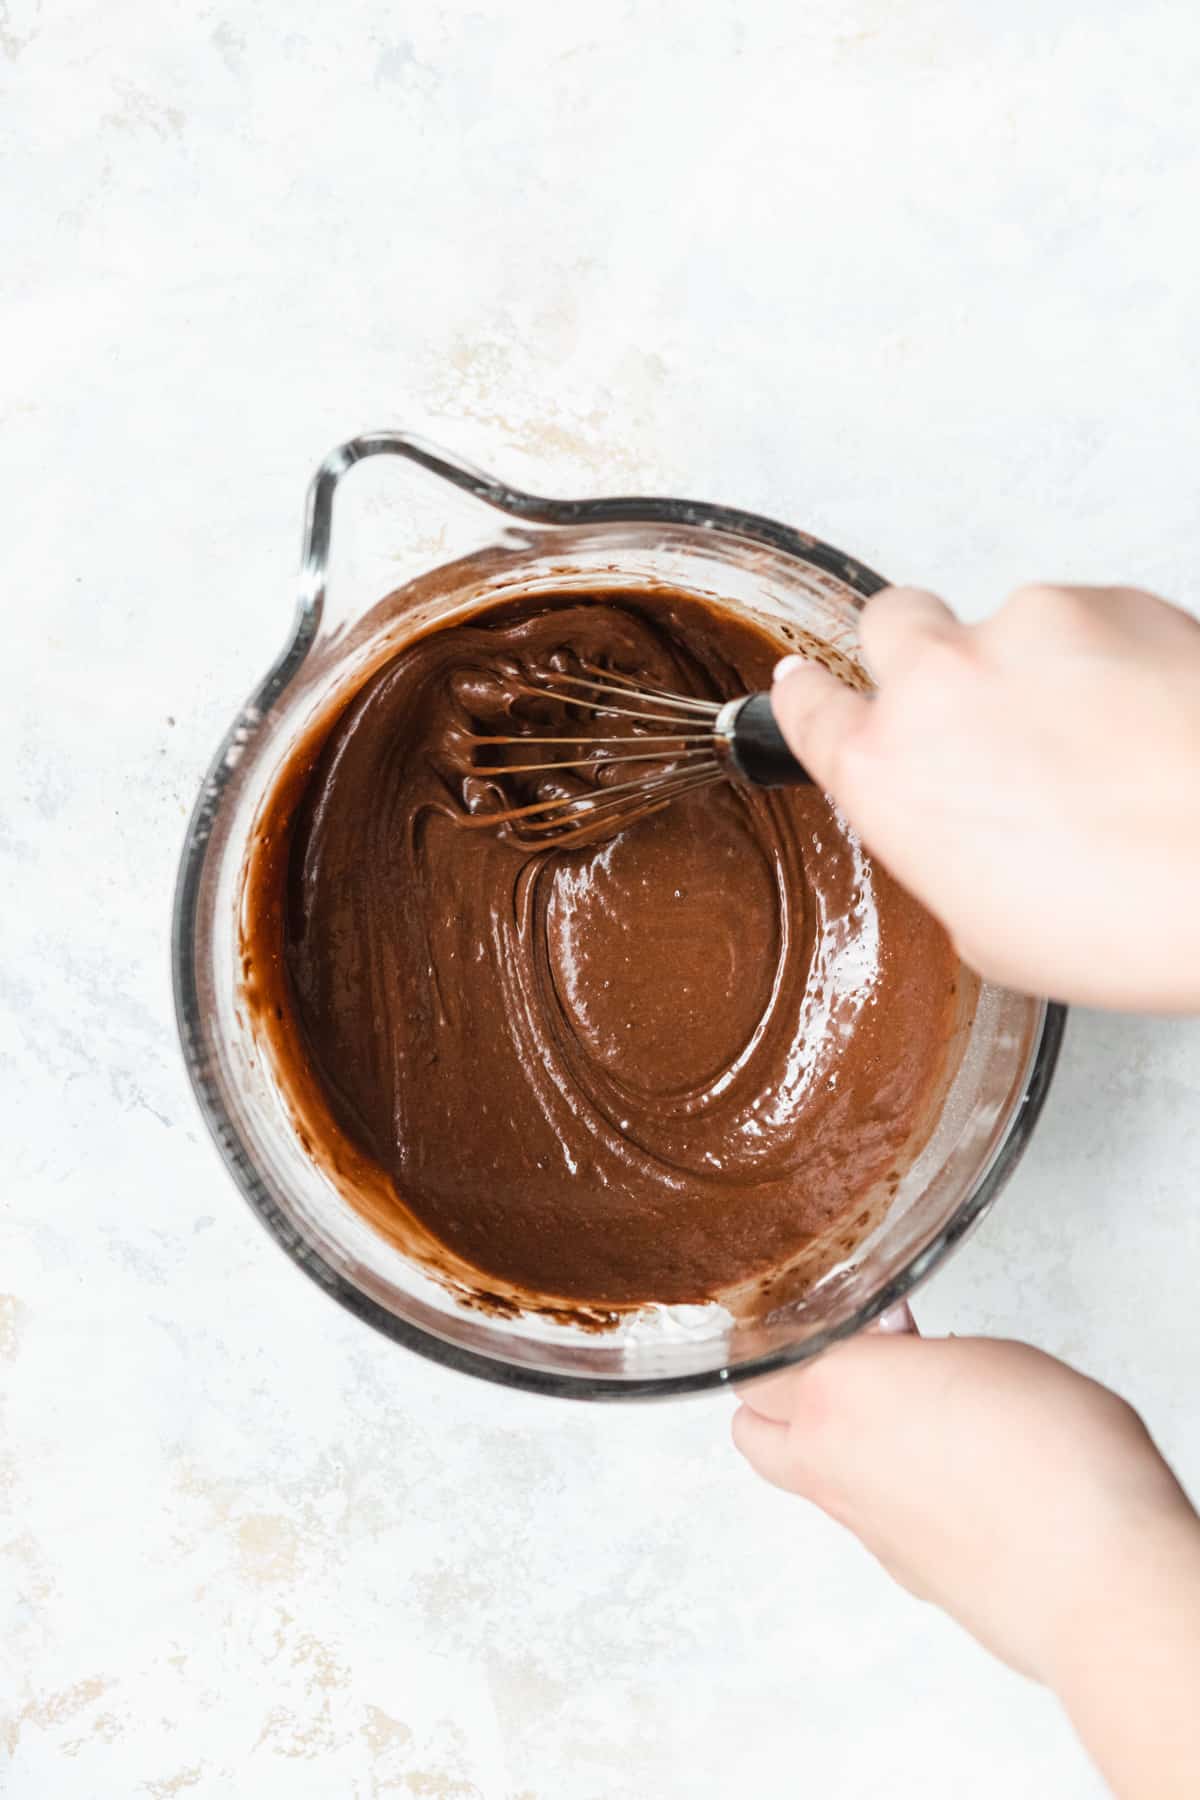 Chocolate cake batter being whisked in a clear bowl.